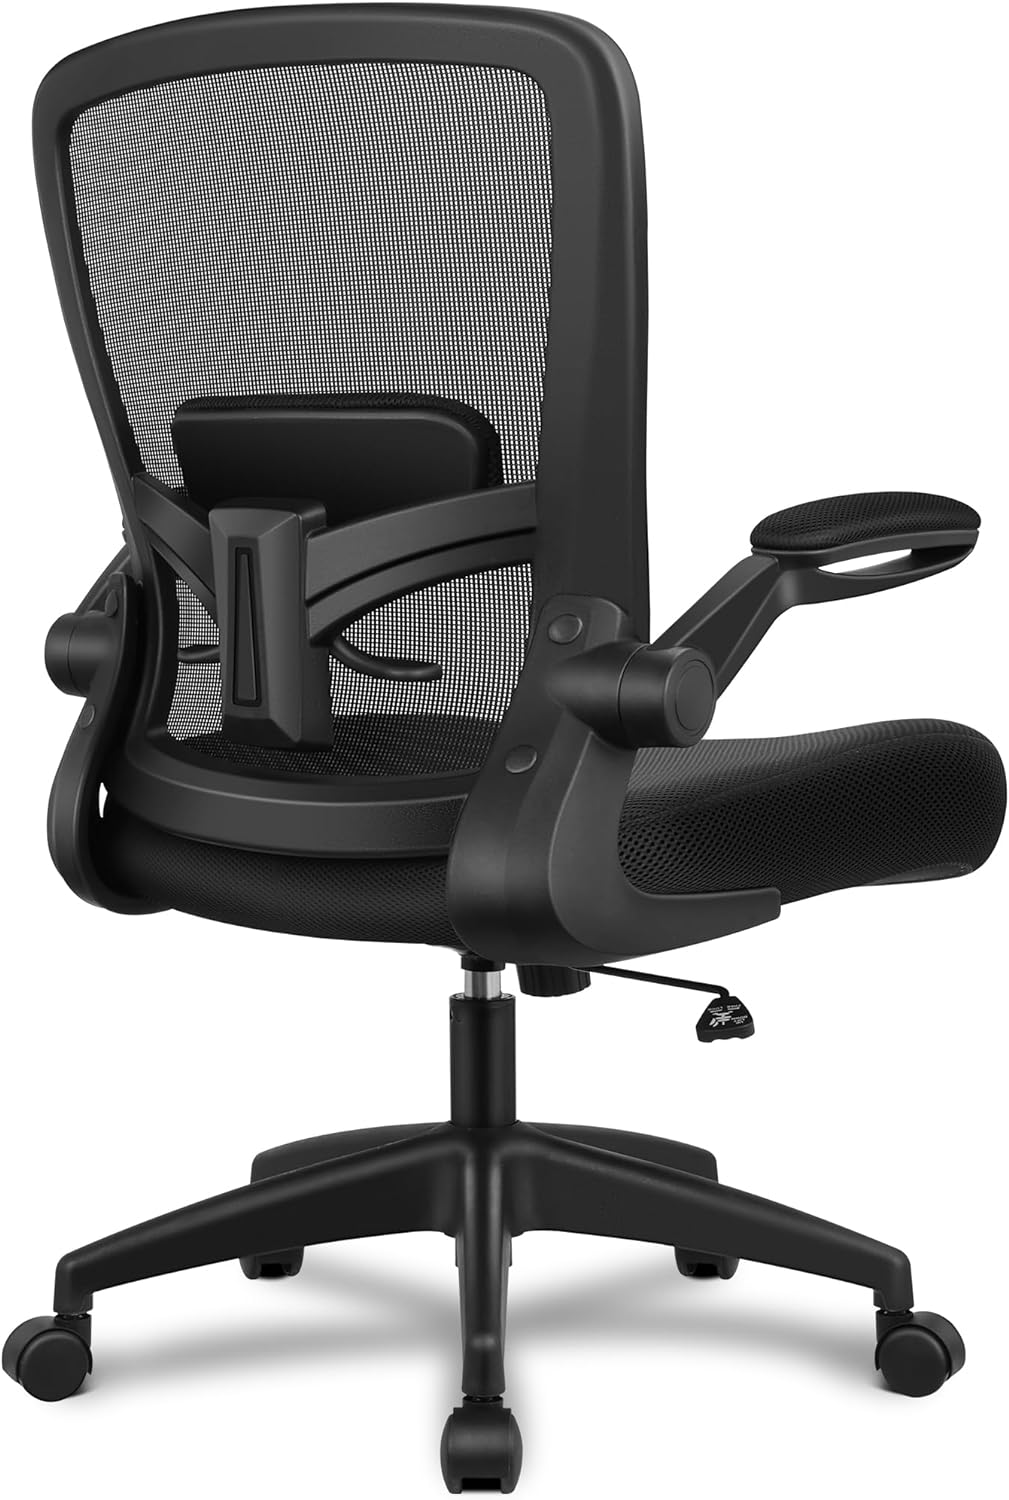 FelixKing Ergonomic Office Chair with Adjustable High Back, Breathable Mesh, Lumbar Support, Flip-up Armrests, Executive Rolling Swivel Comfy Task Computer Chair for Home Office (Black)